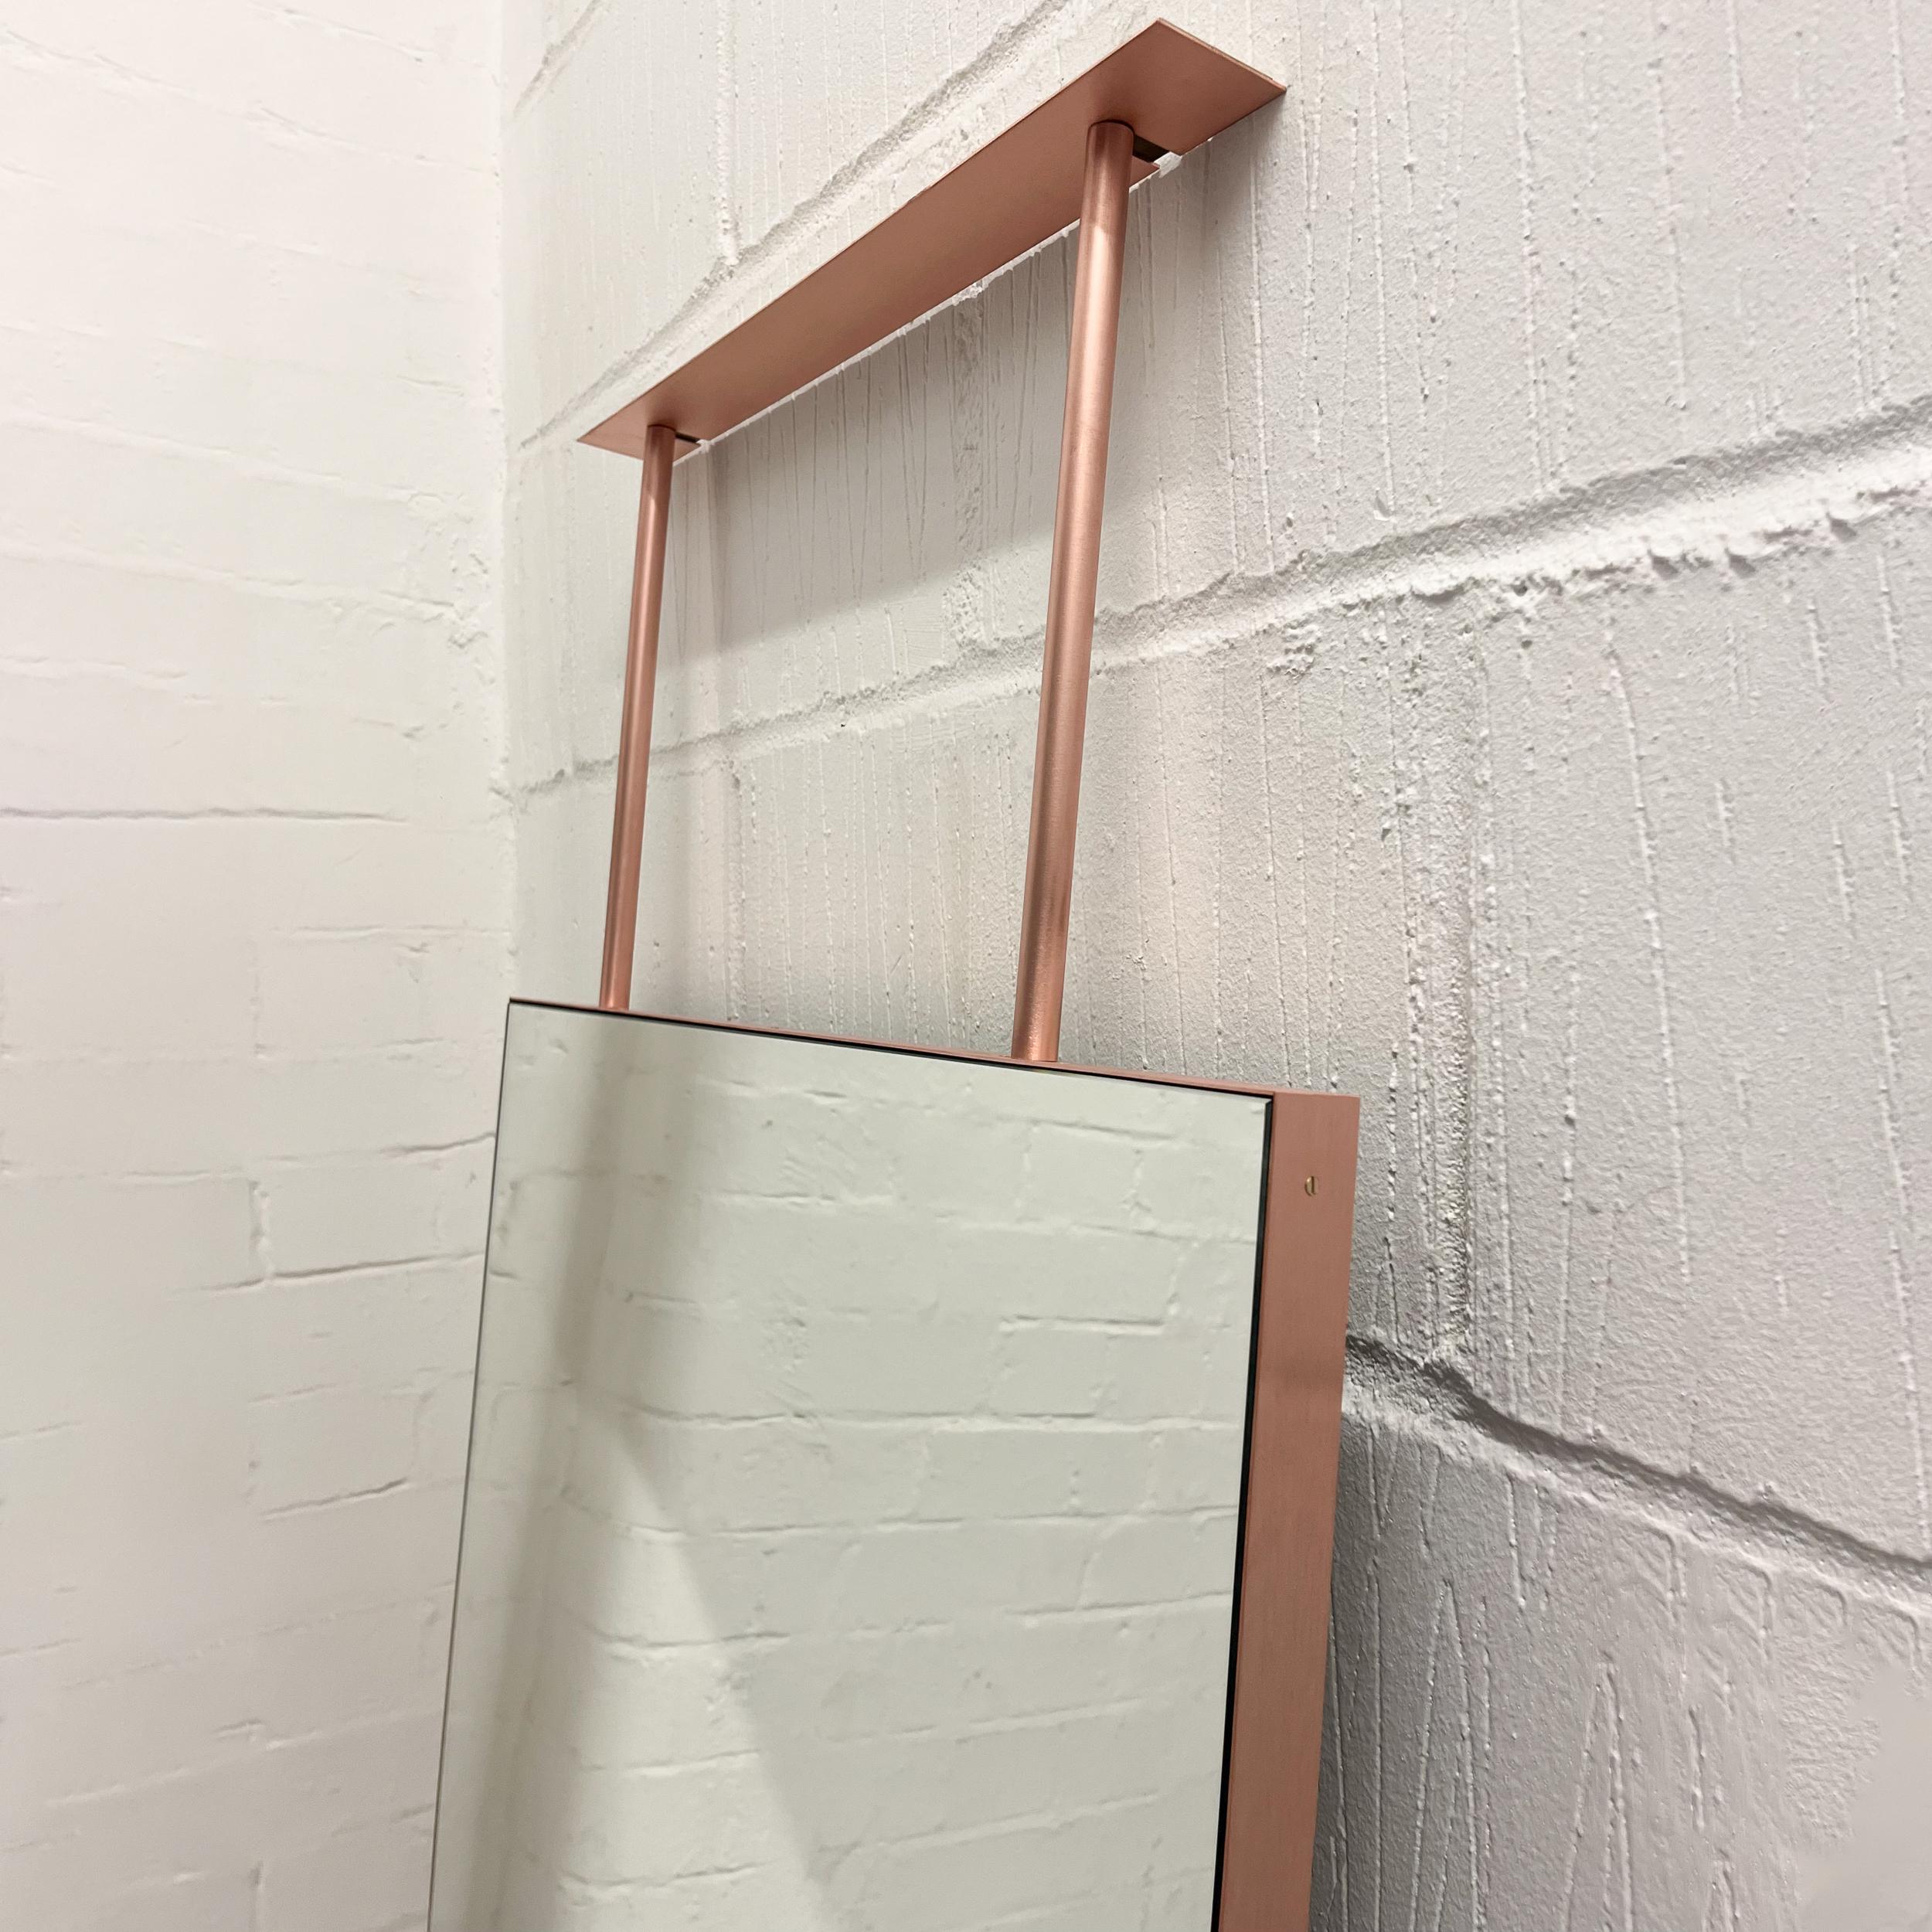 Stunning modern rectangular mirror with a copper frame.  This piece is part of our original and fully customisable collection of Ceiling Suspended mirrors, designed and handcrafted in London, UK. The detailing and finish, including visible screws,